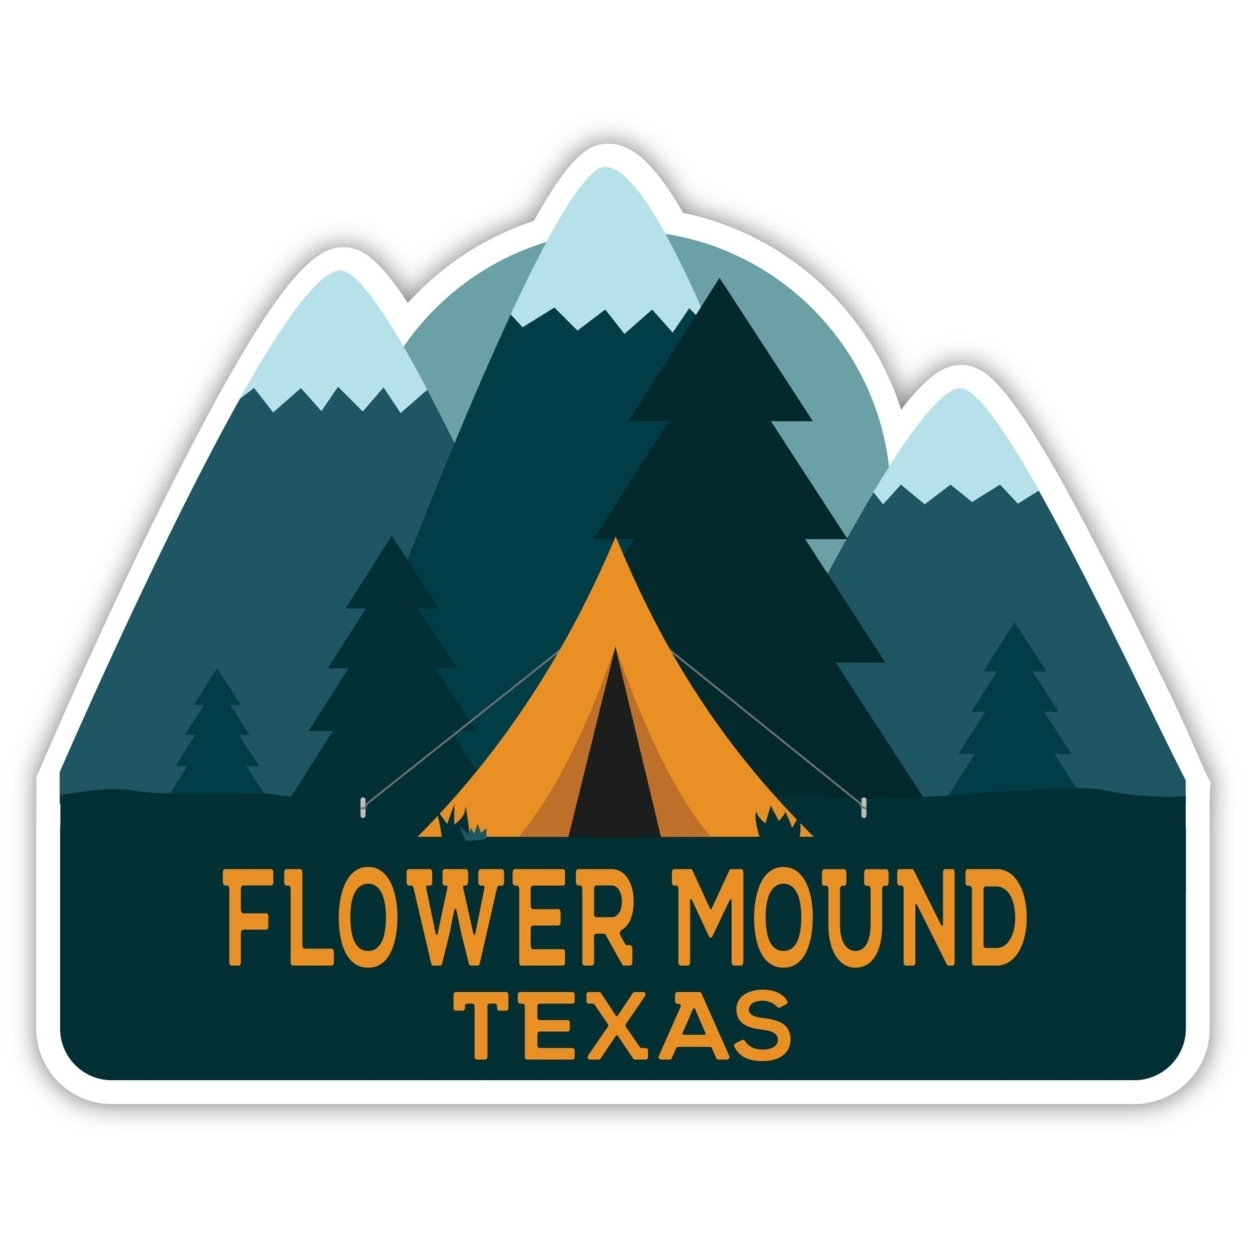 Flower Mound Texas Souvenir Decorative Stickers (Choose Theme And Size) - 4-Pack, 2-Inch, Bear